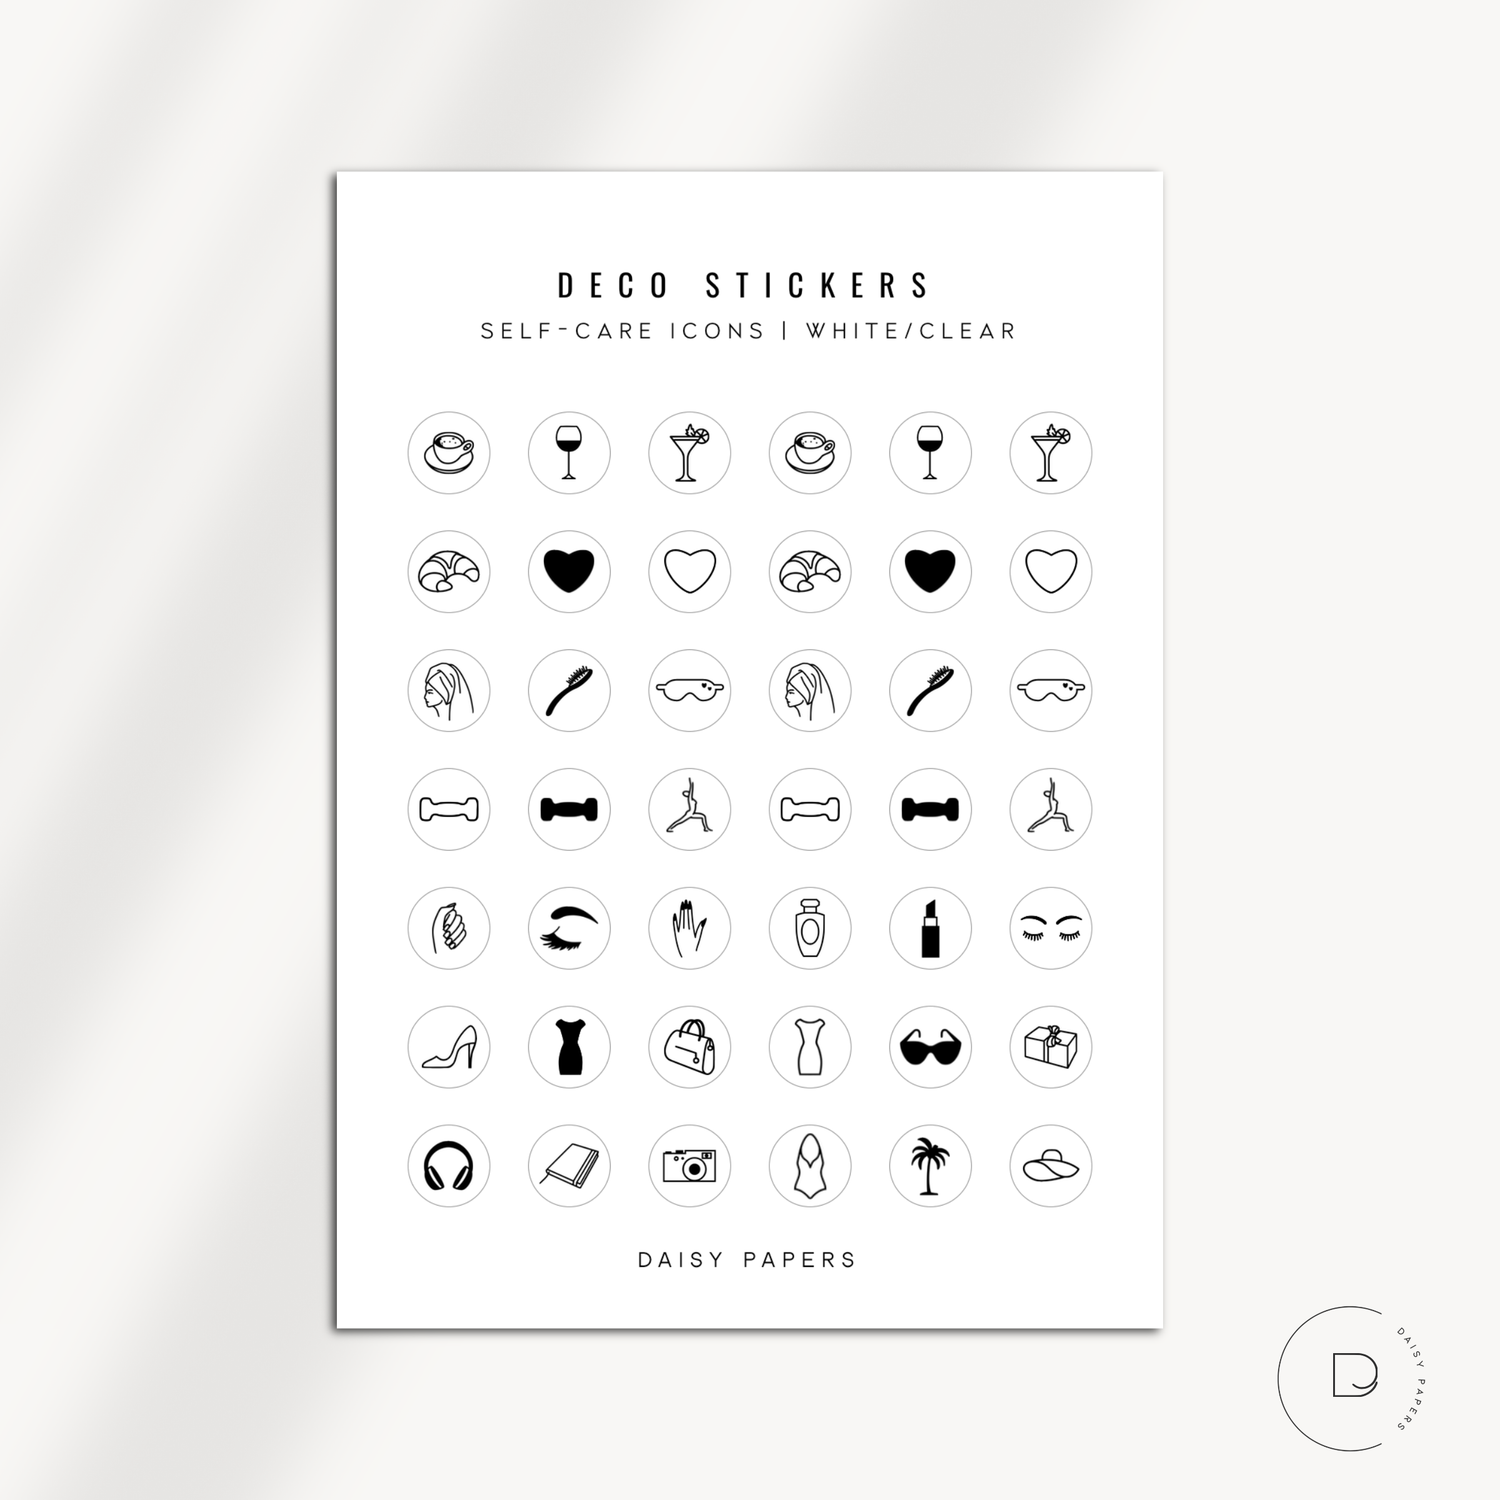 DECO STICKERS - SELF-CARE ICONS